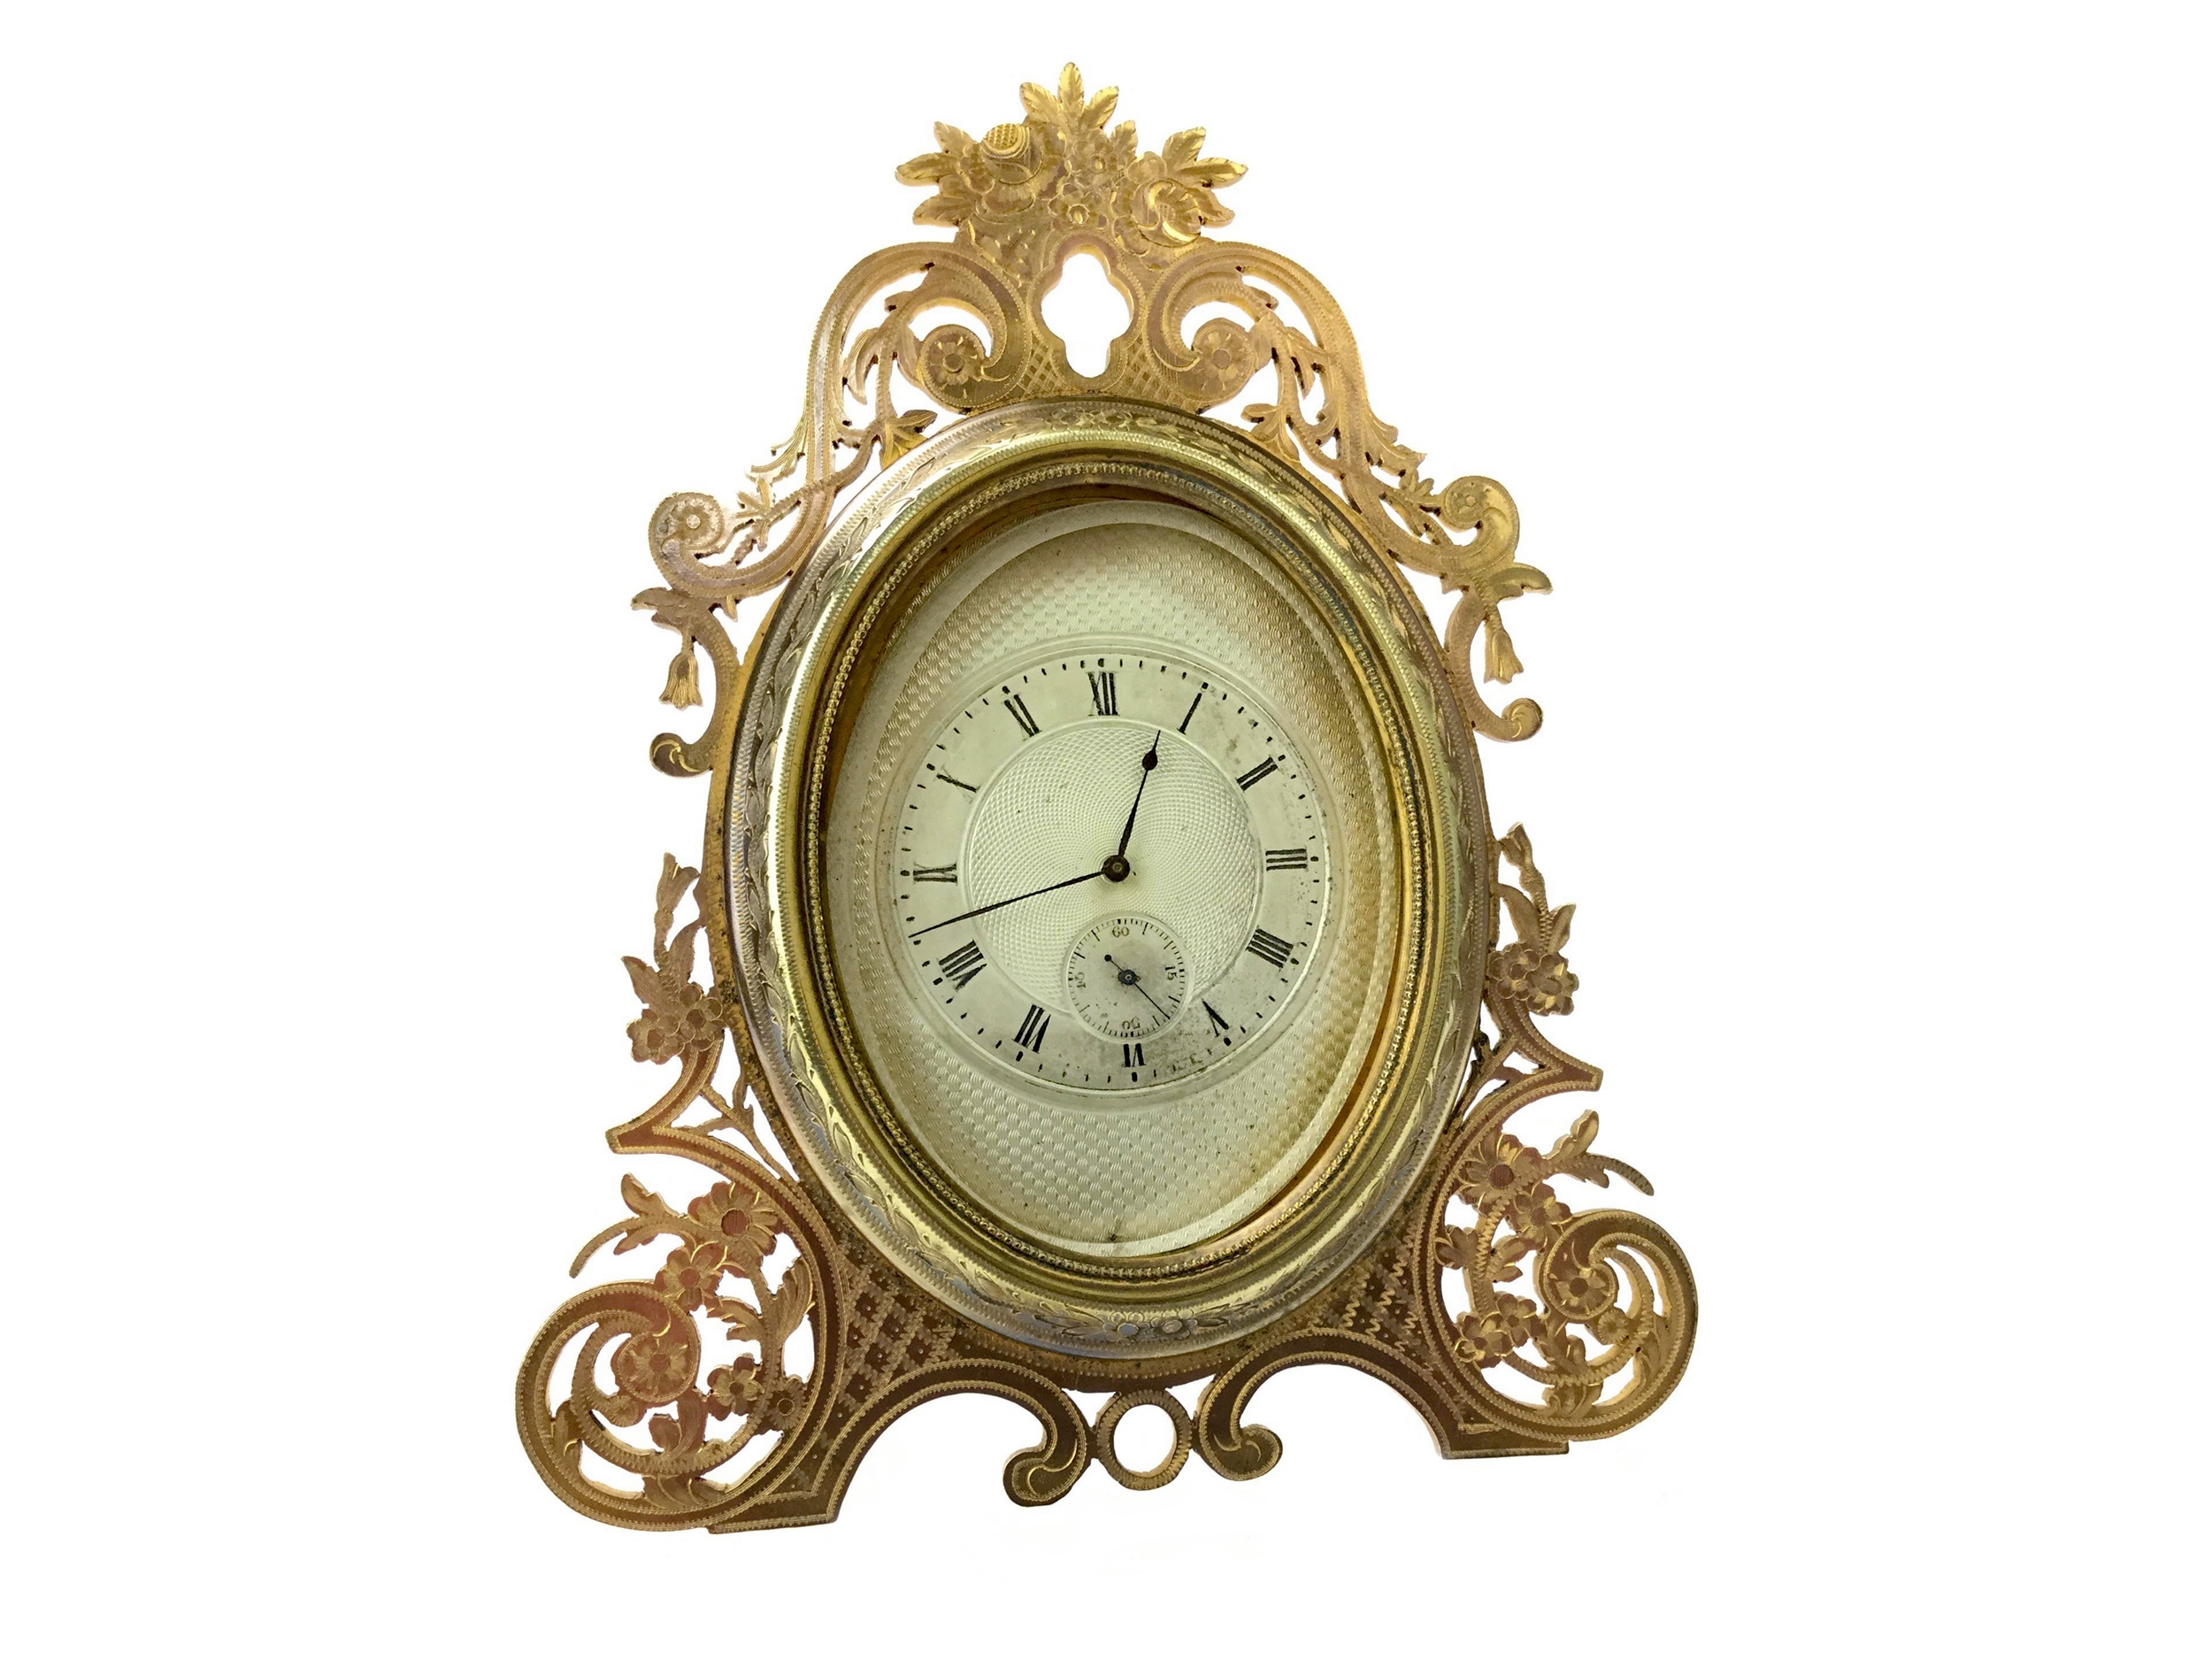 AN EARLY 20TH CENTURY STRUT CLOCK IN THE STYLE OF THOMAS COLE